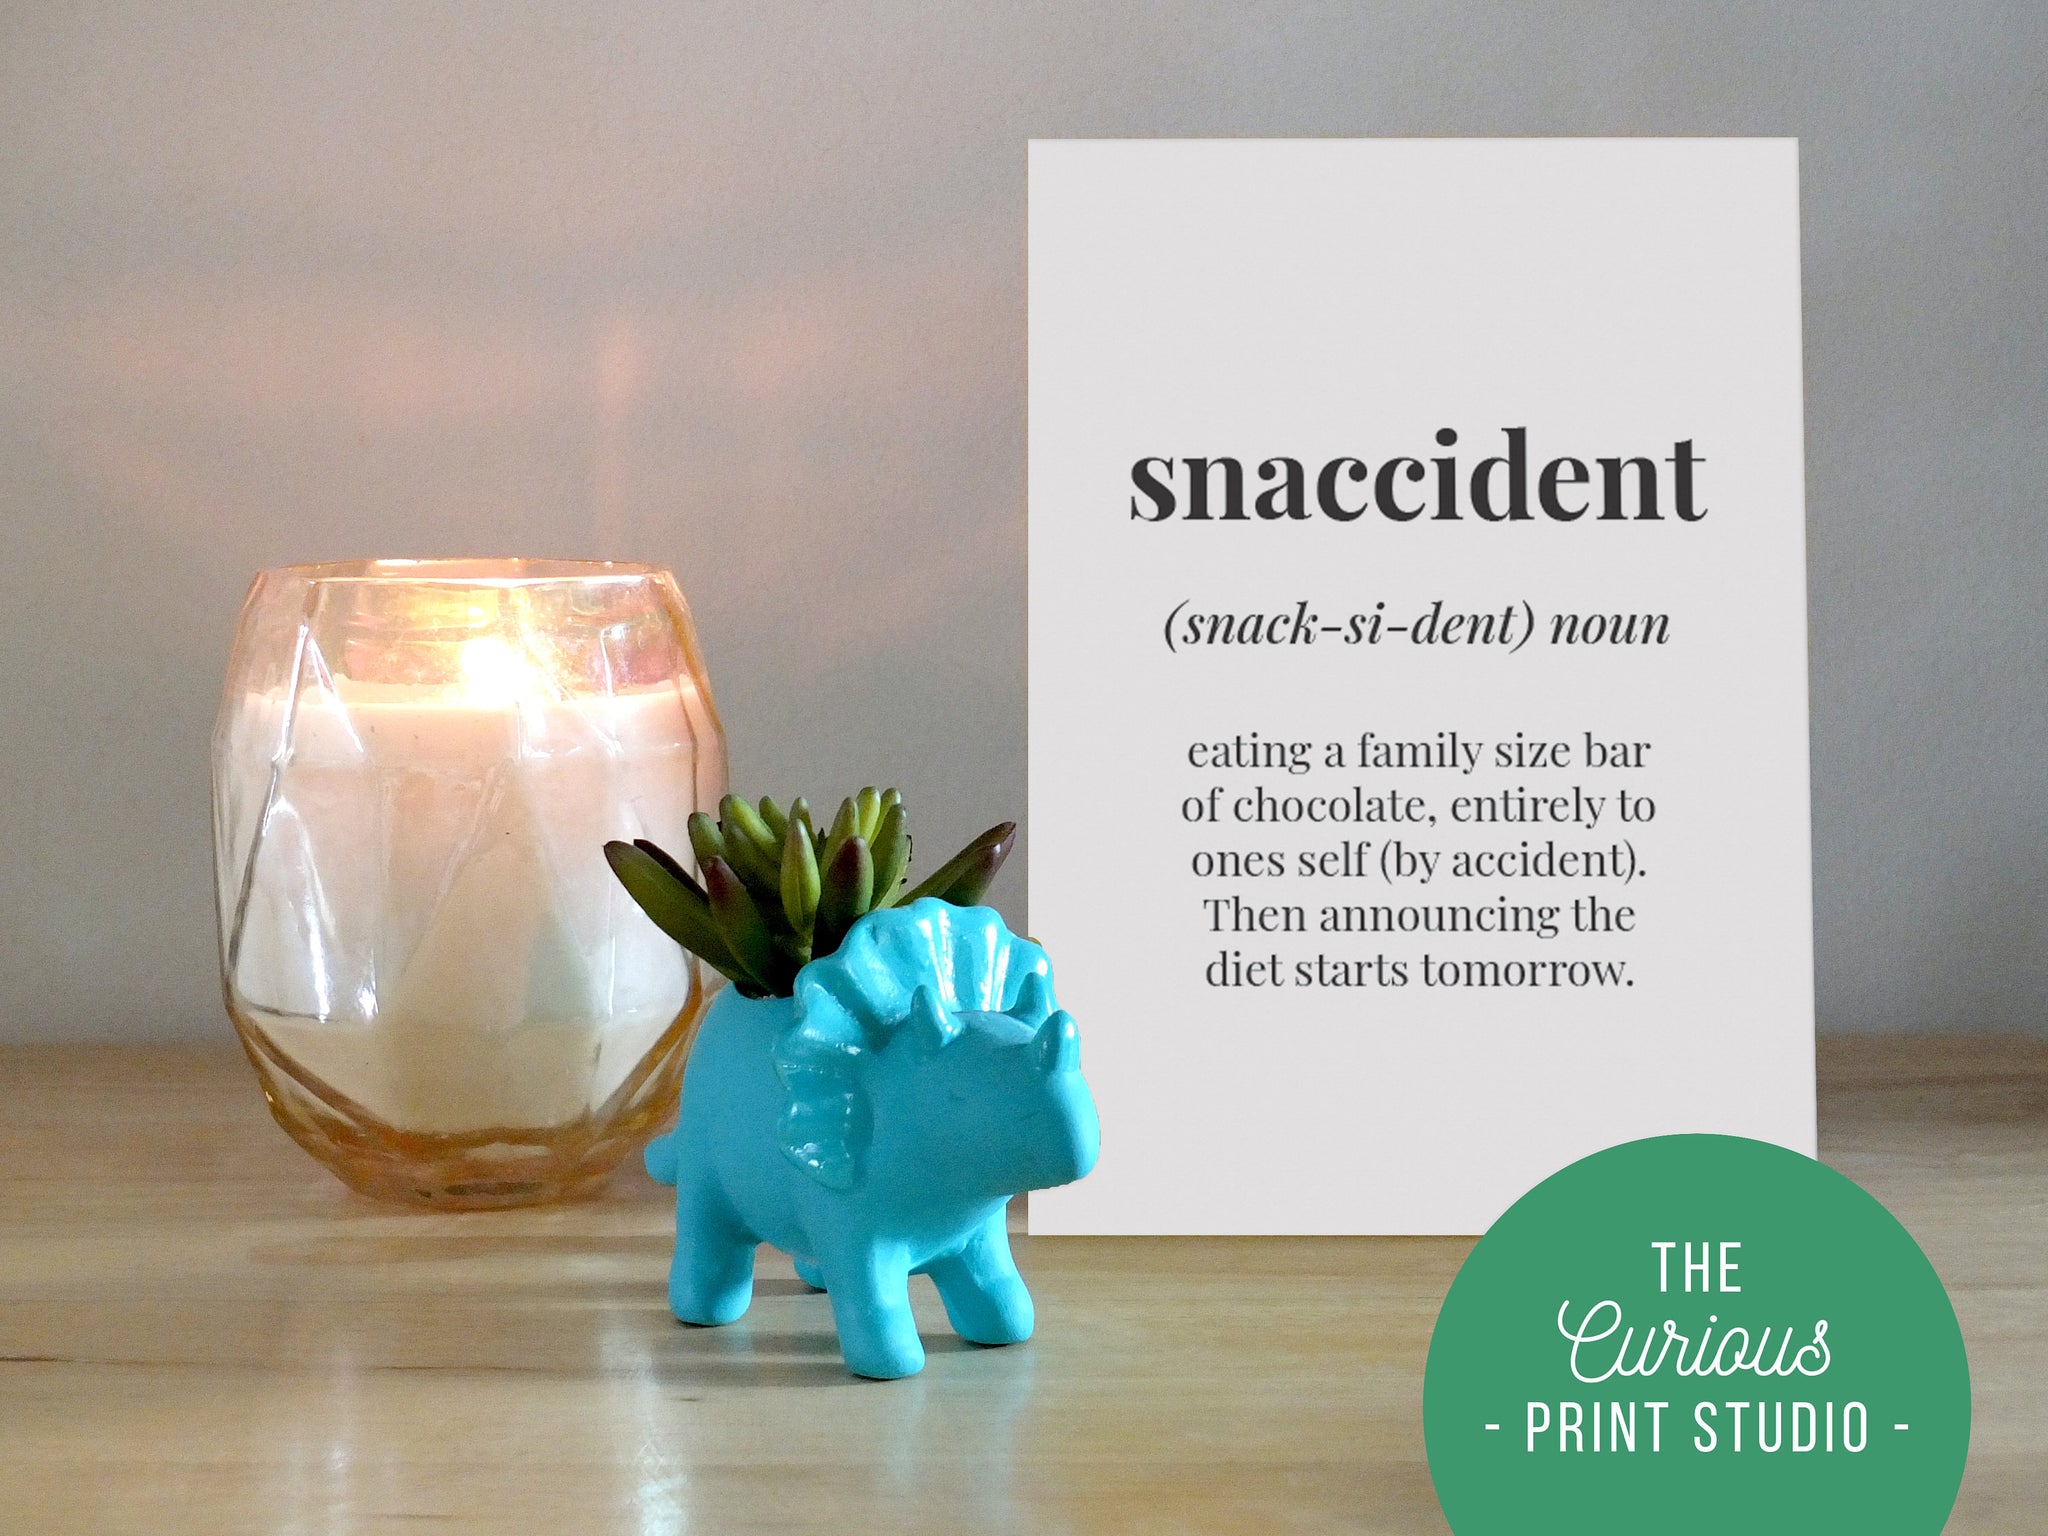 Snaccident Definition